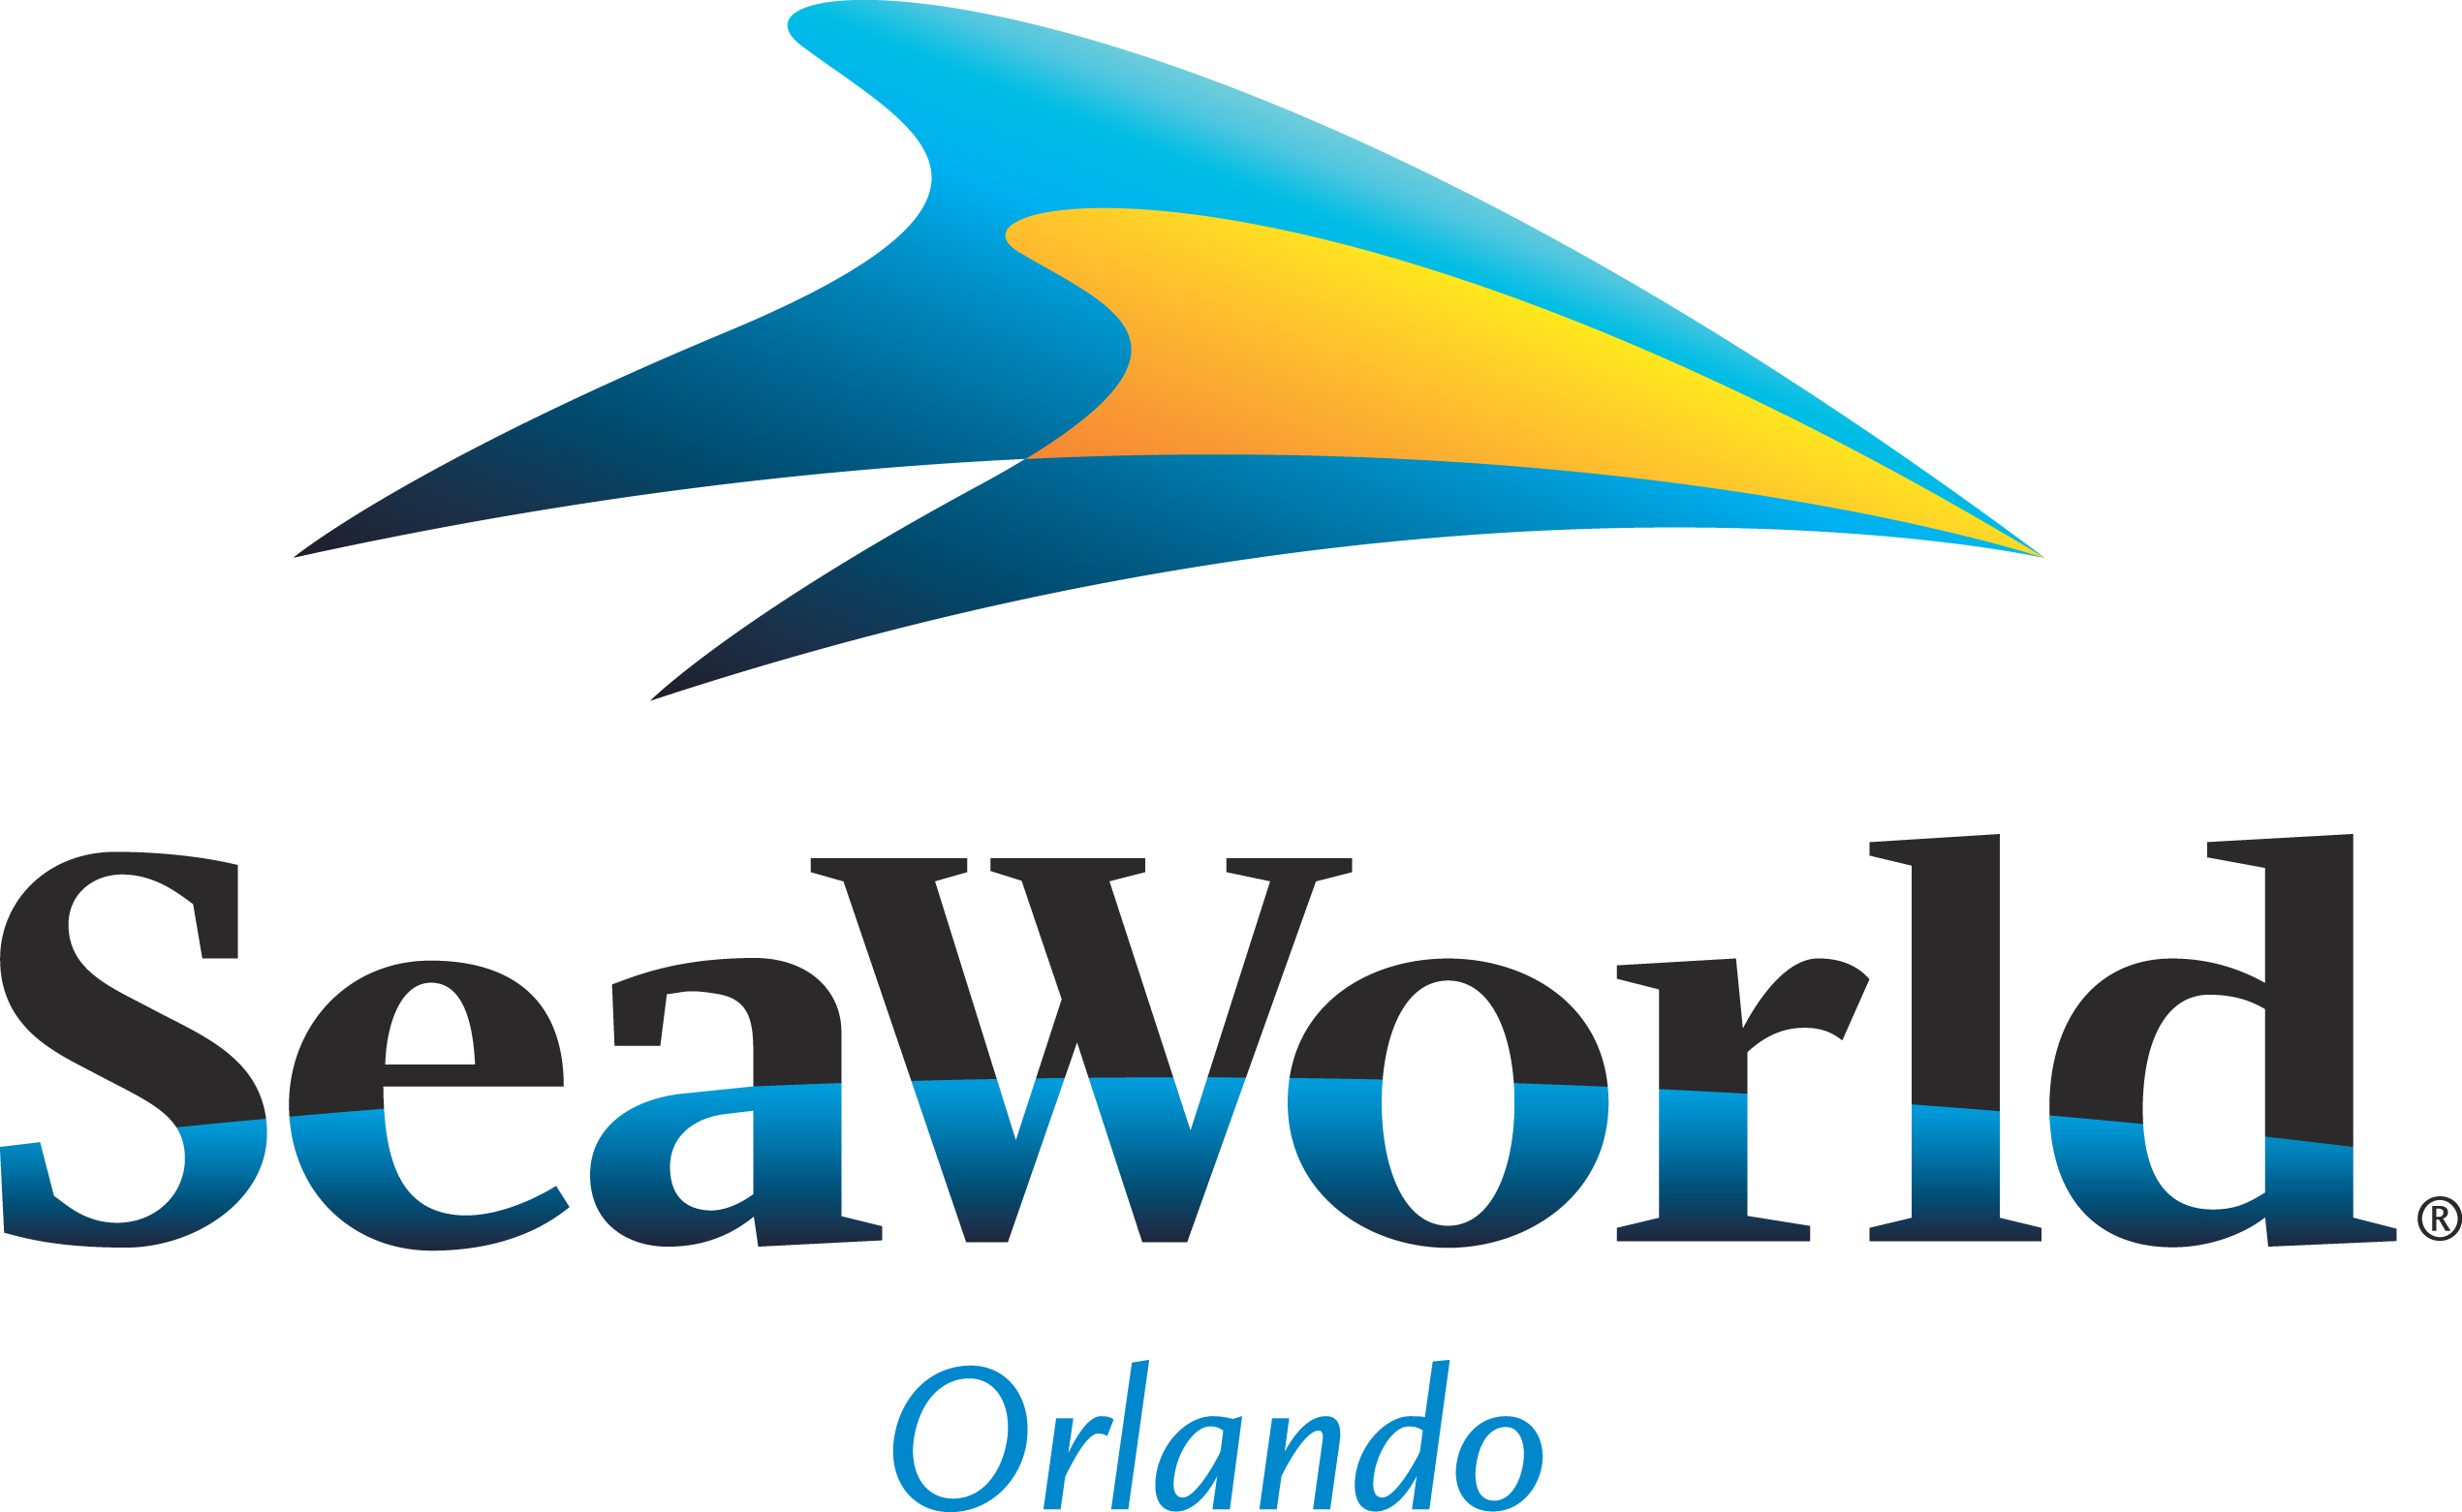 Sea World Orlando  discount tickets for groups